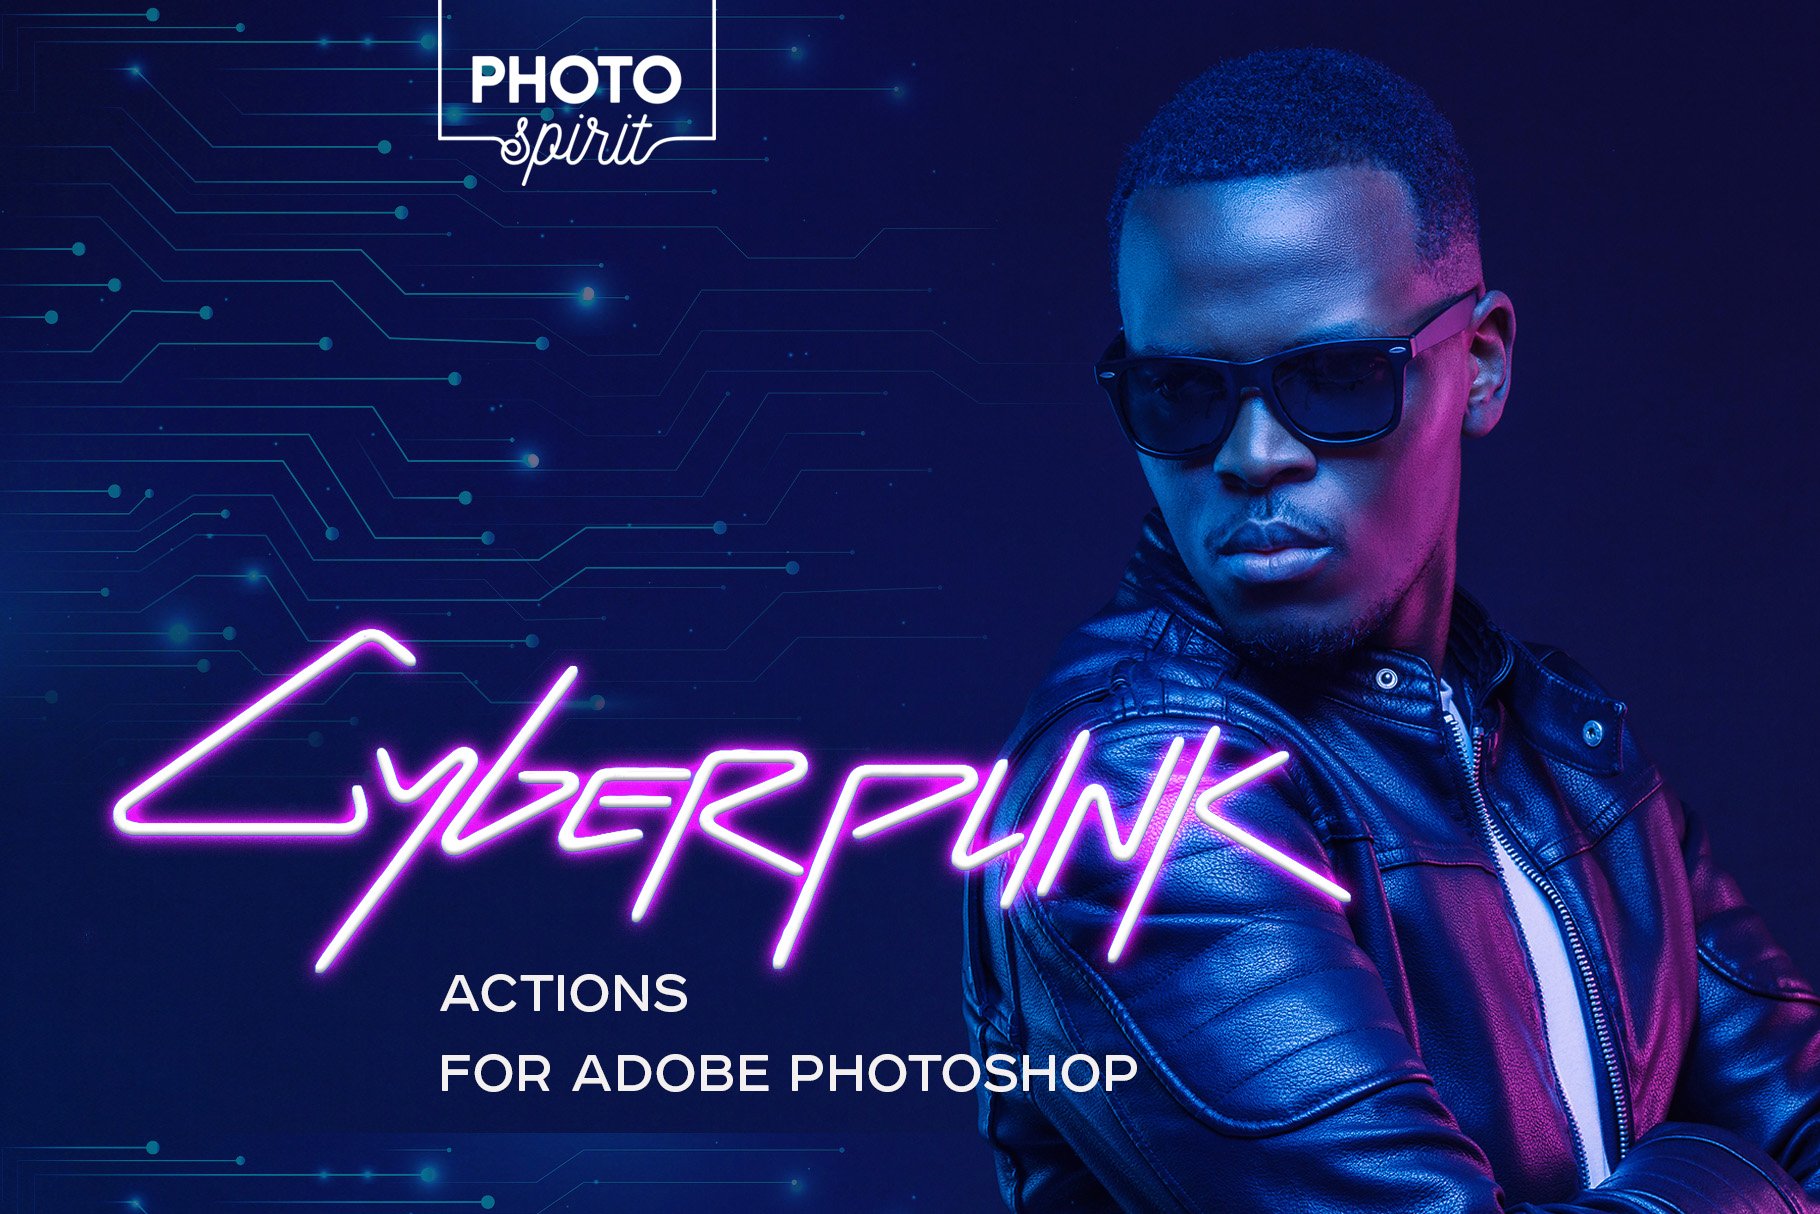 Cyberpunk Actions For Photoshopcover image.